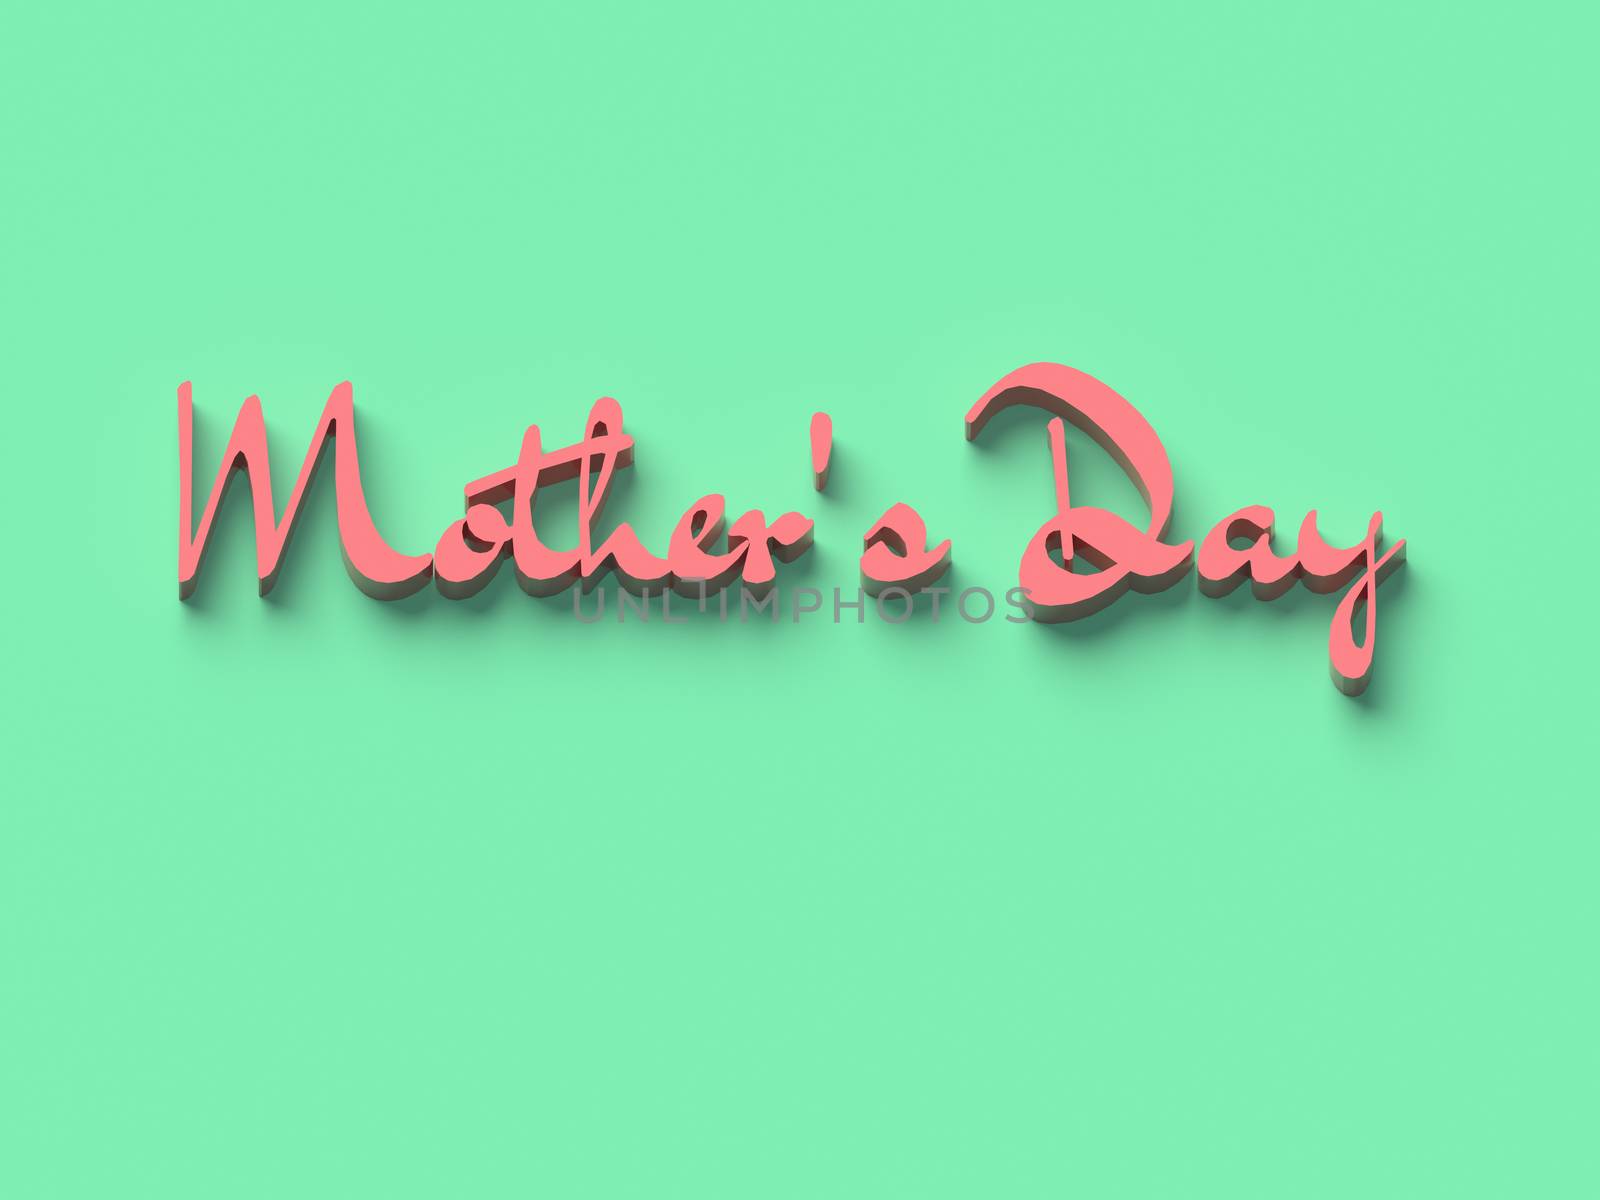 COLOR PHOTO OF 3D WORDS 'MOTHER'S DAY' ON PLAIN BACKGROUND